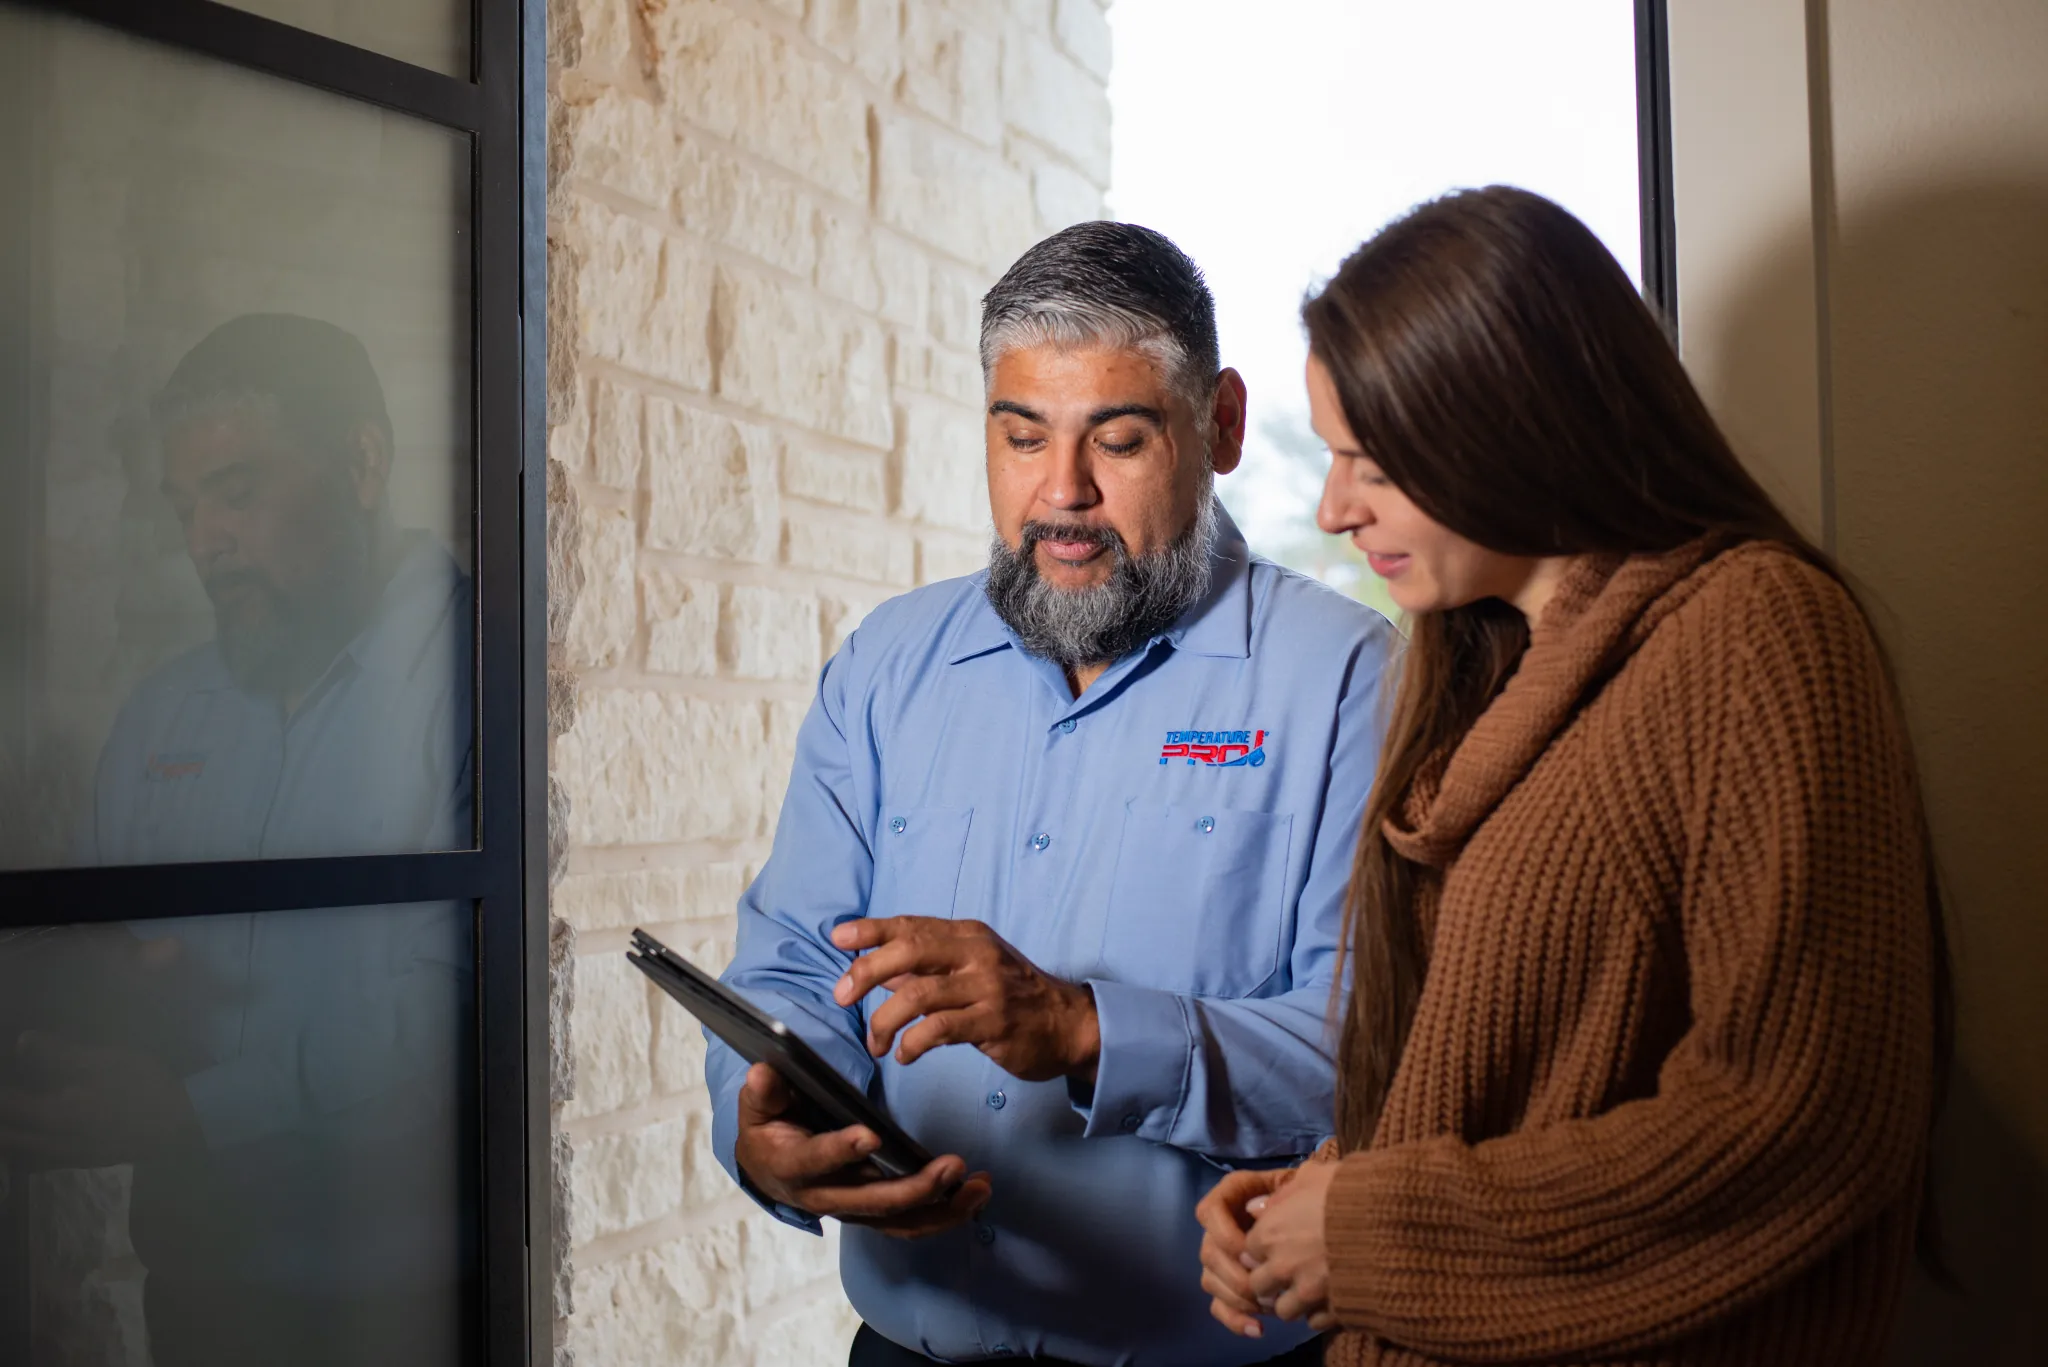 Buxmont heating technician standing with a customer at their front door, looking at an ipad.